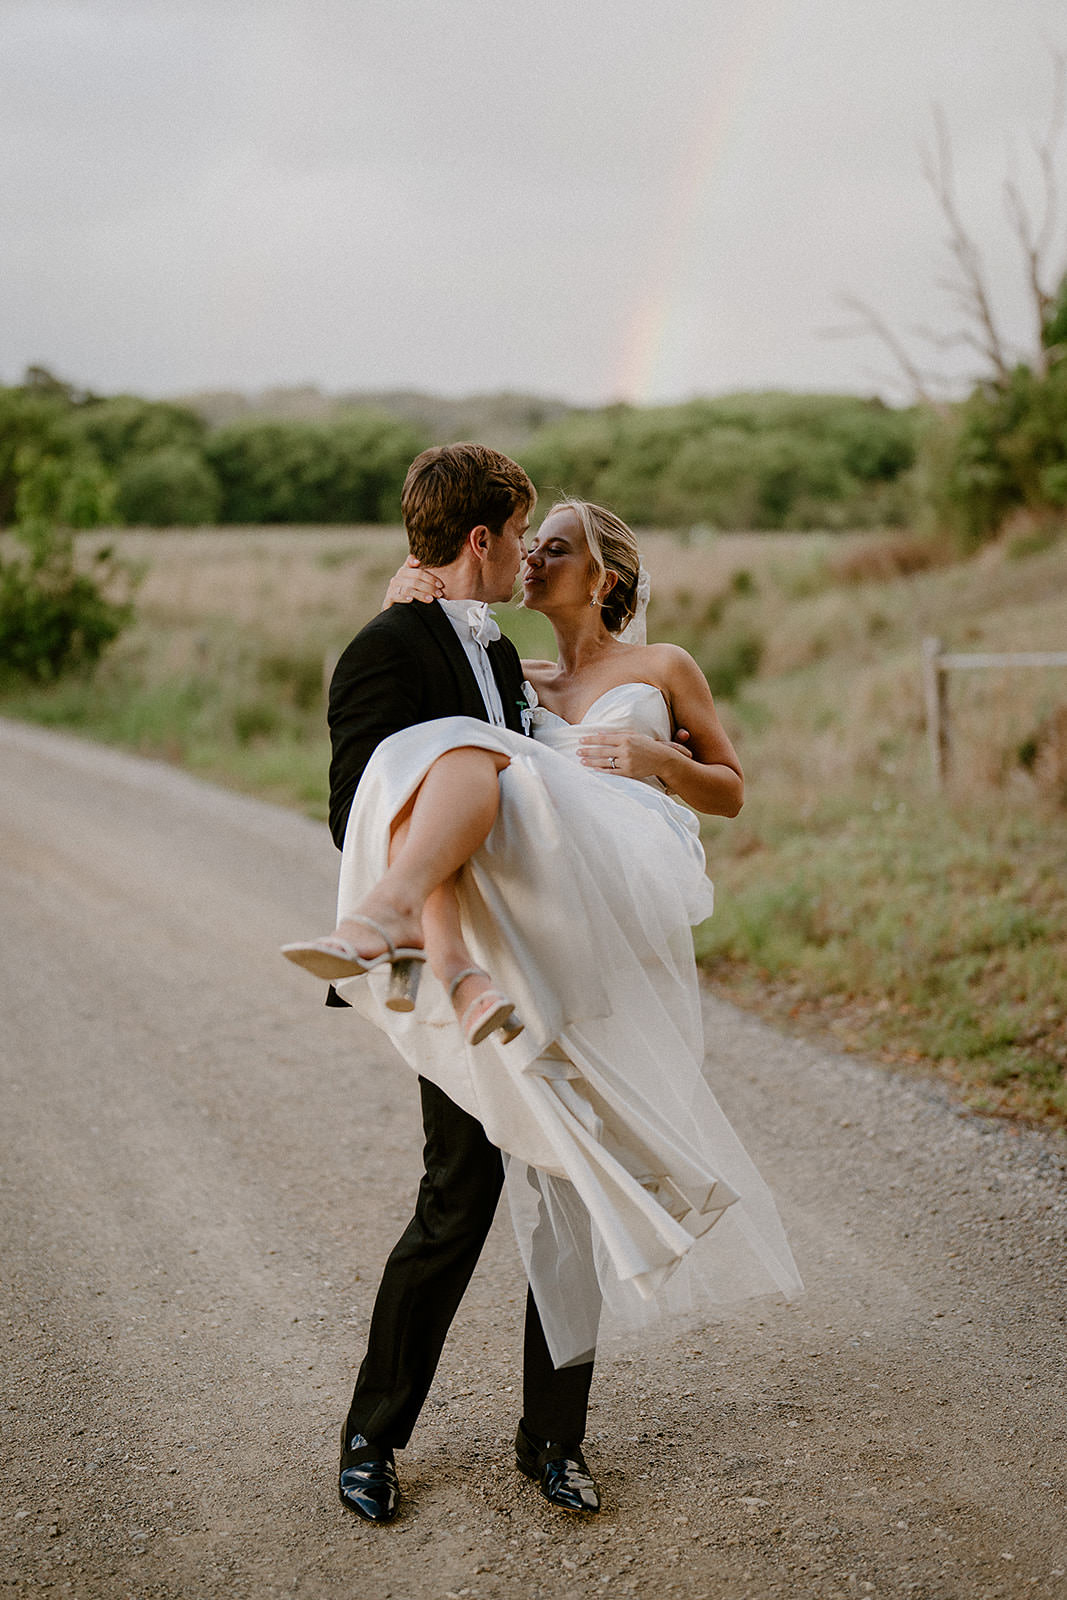 A photo of a handsome groom picking up his bride on a country road with a rainbow in the background at their byron bay wedding.